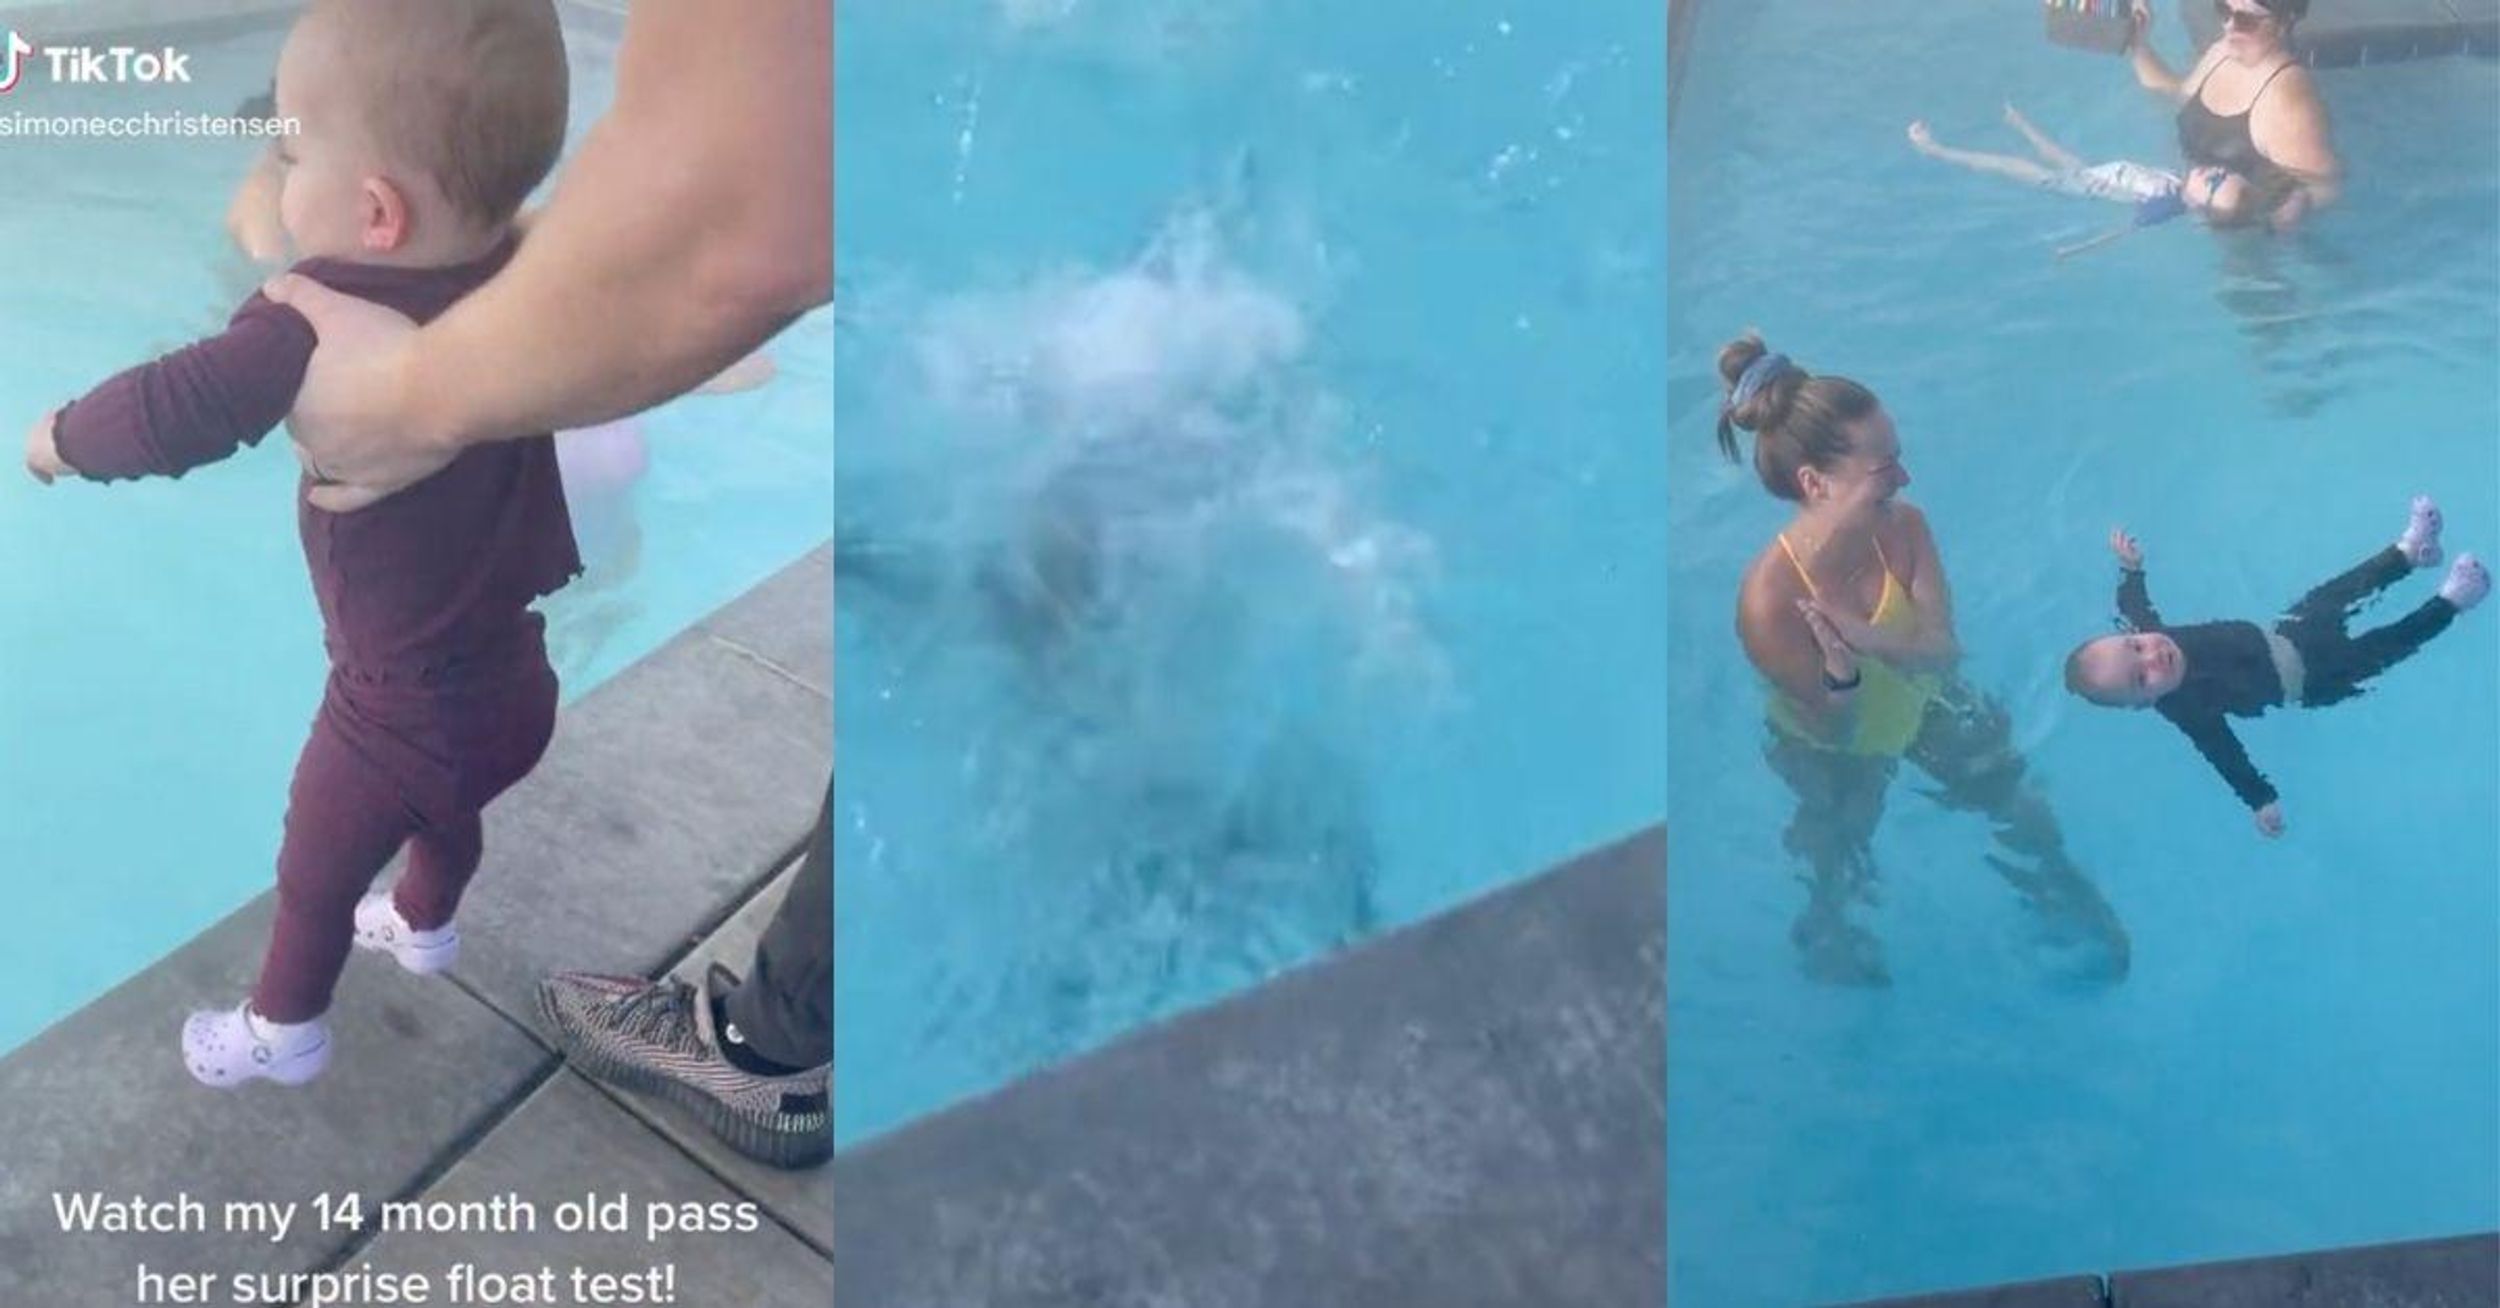 Mom Sparks Debate With Video Of Her 14-Month-Old Baby Passing A 'Surprise Float Test' In Pool